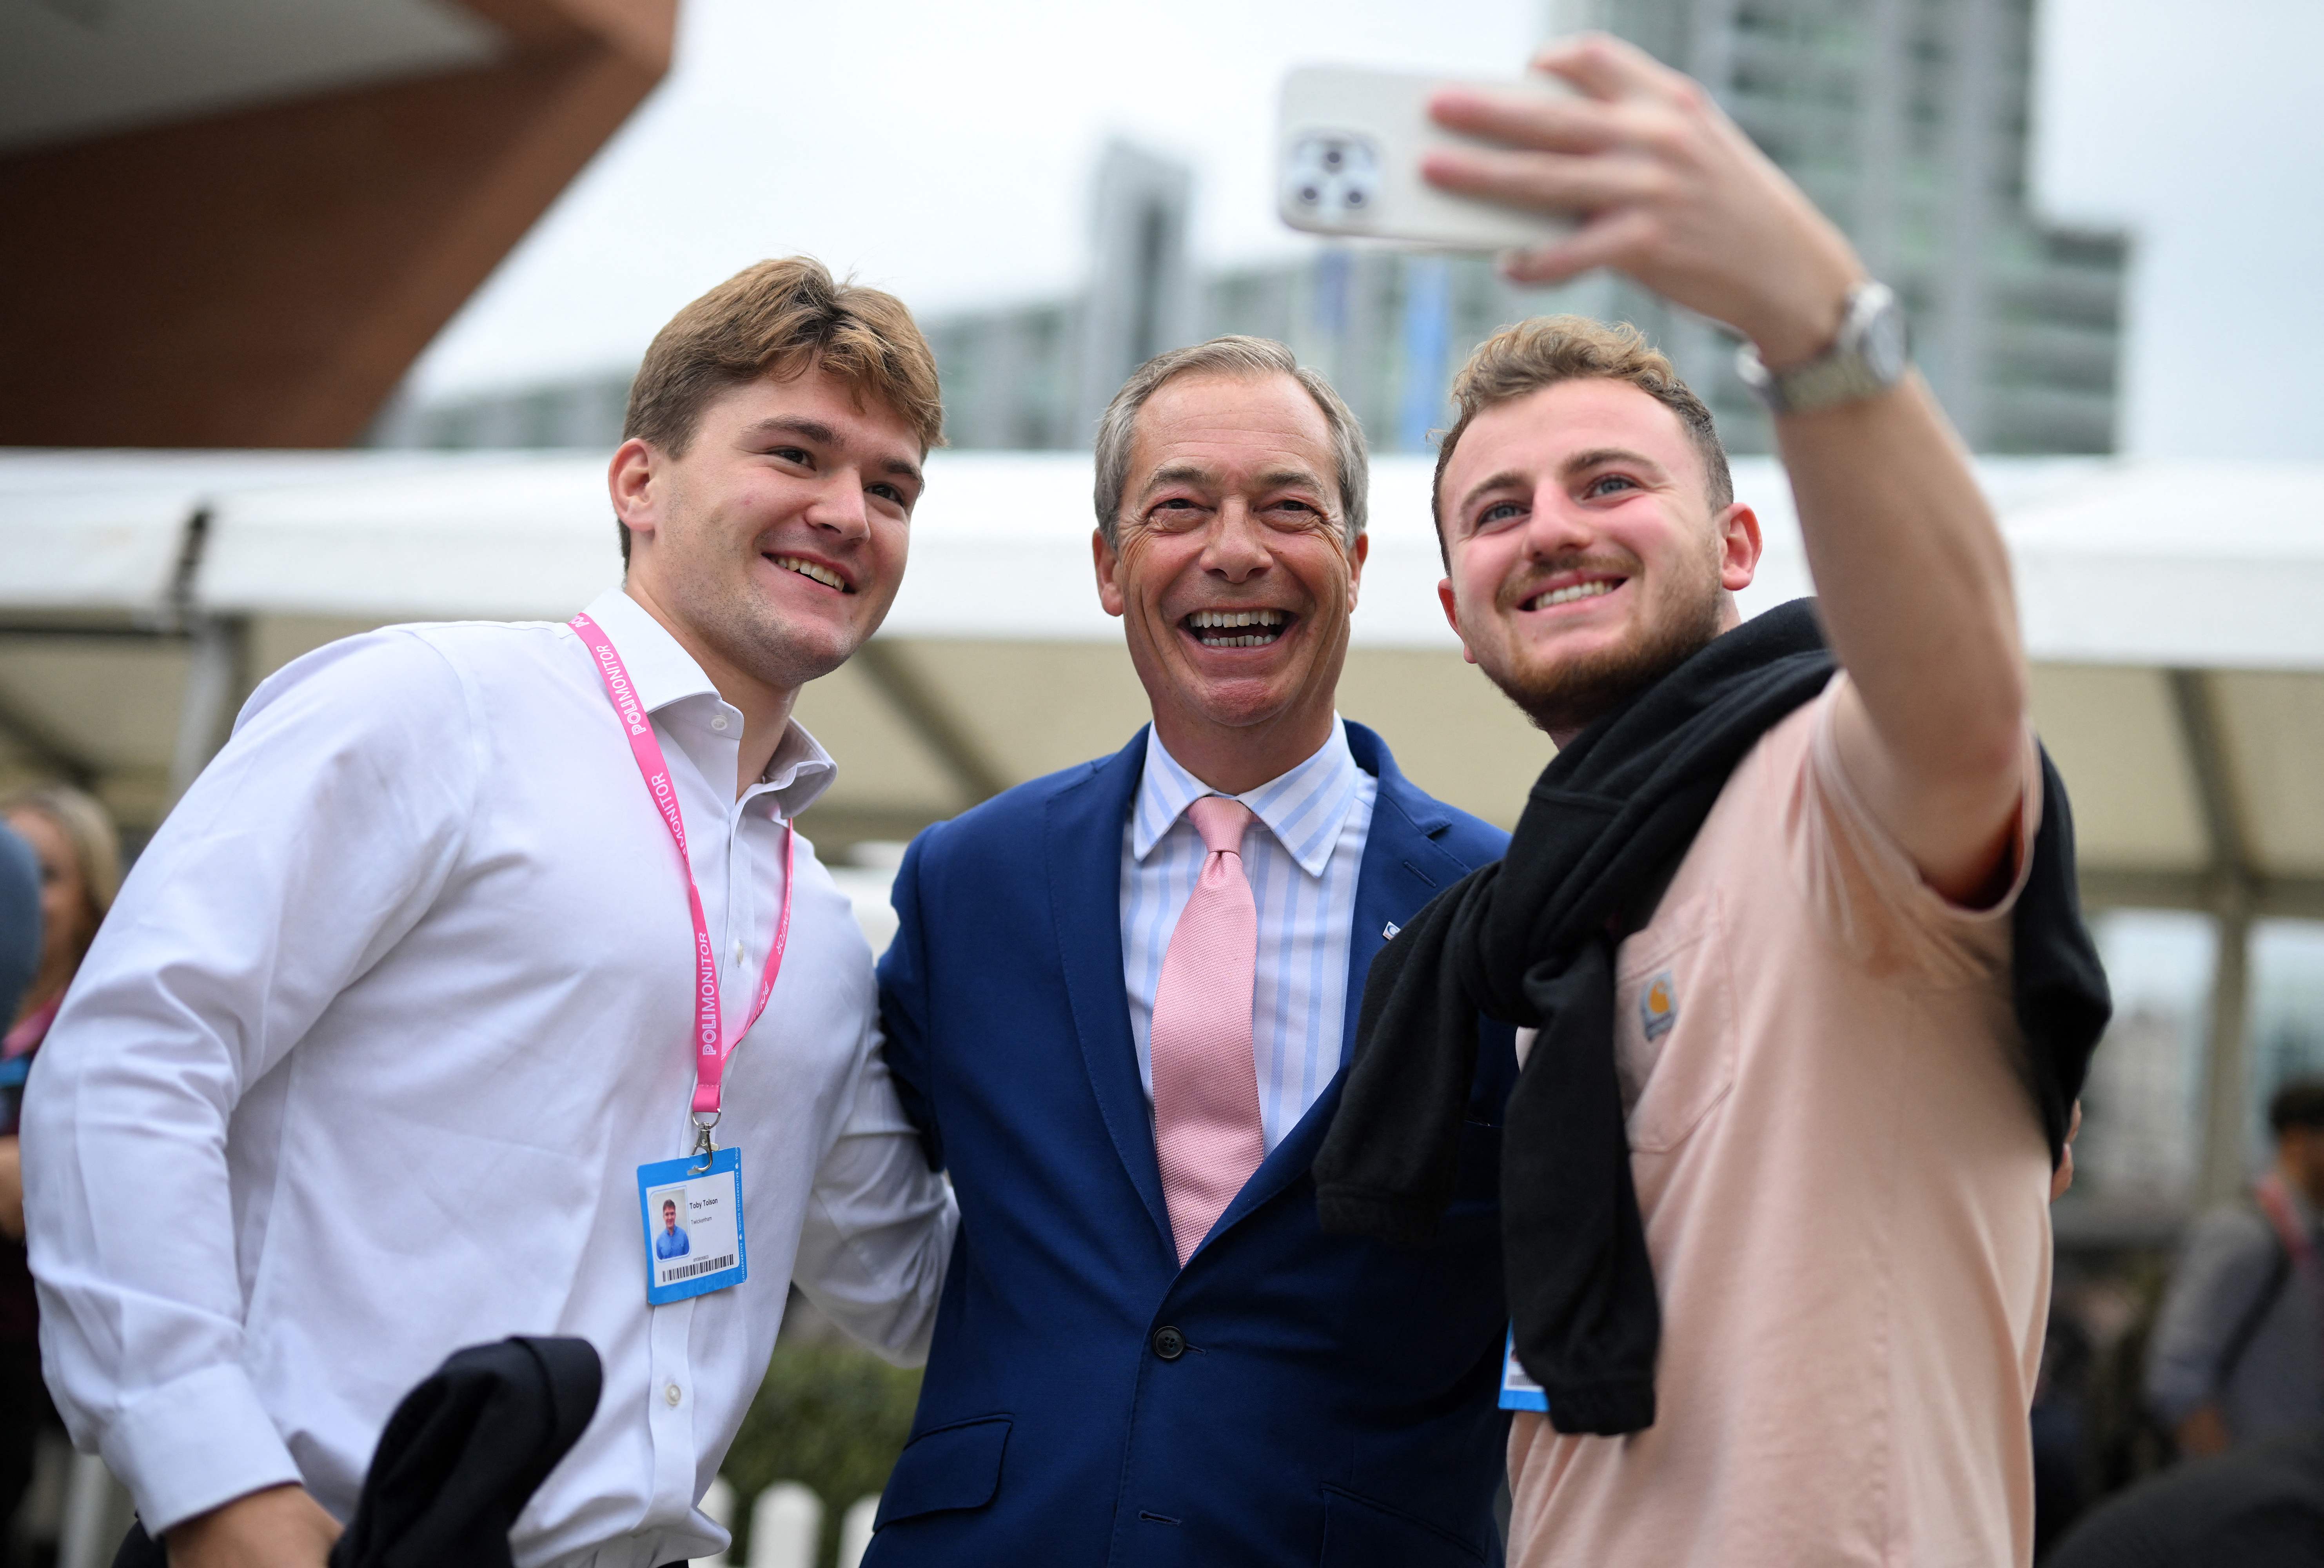 Delegates at the recent Tory conference pose with Nigel Farage